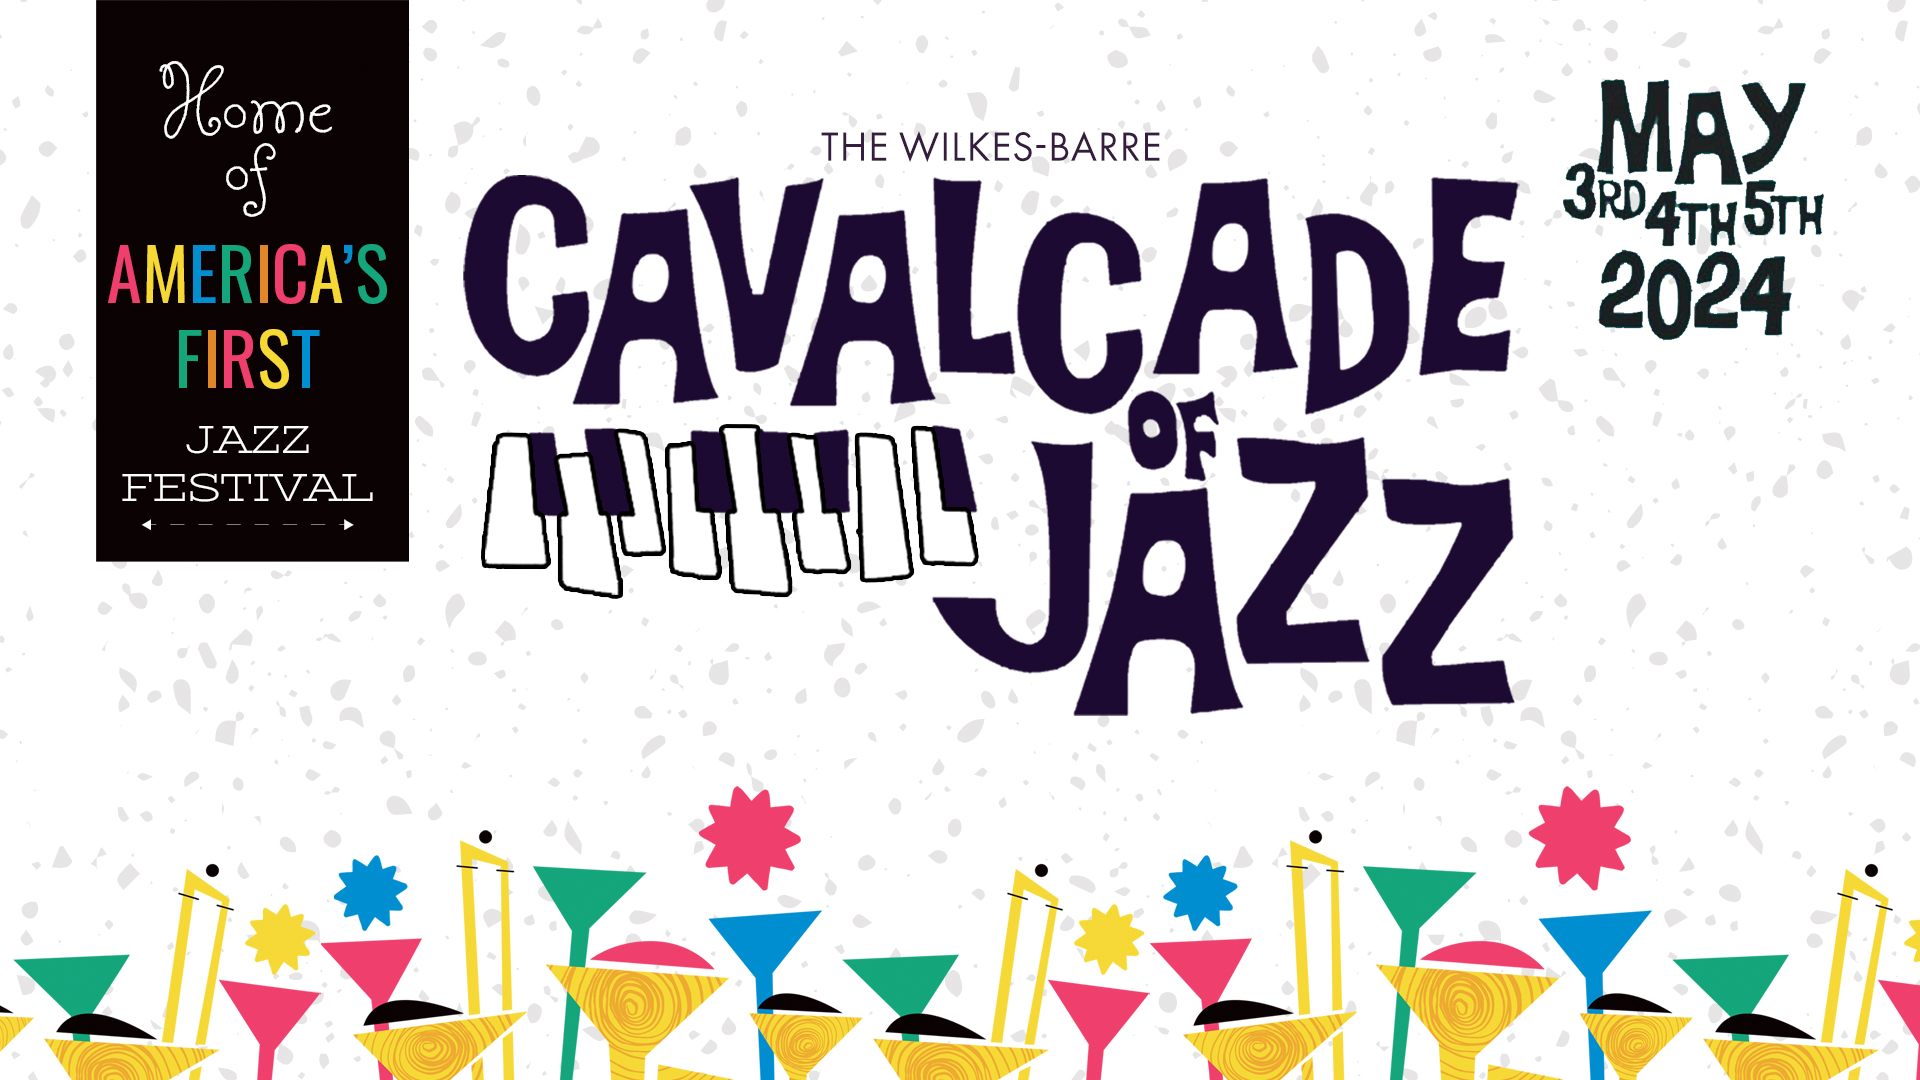 Wilkes-Barre Cavalcade of Jazz logo with information on the May 2024 Event.